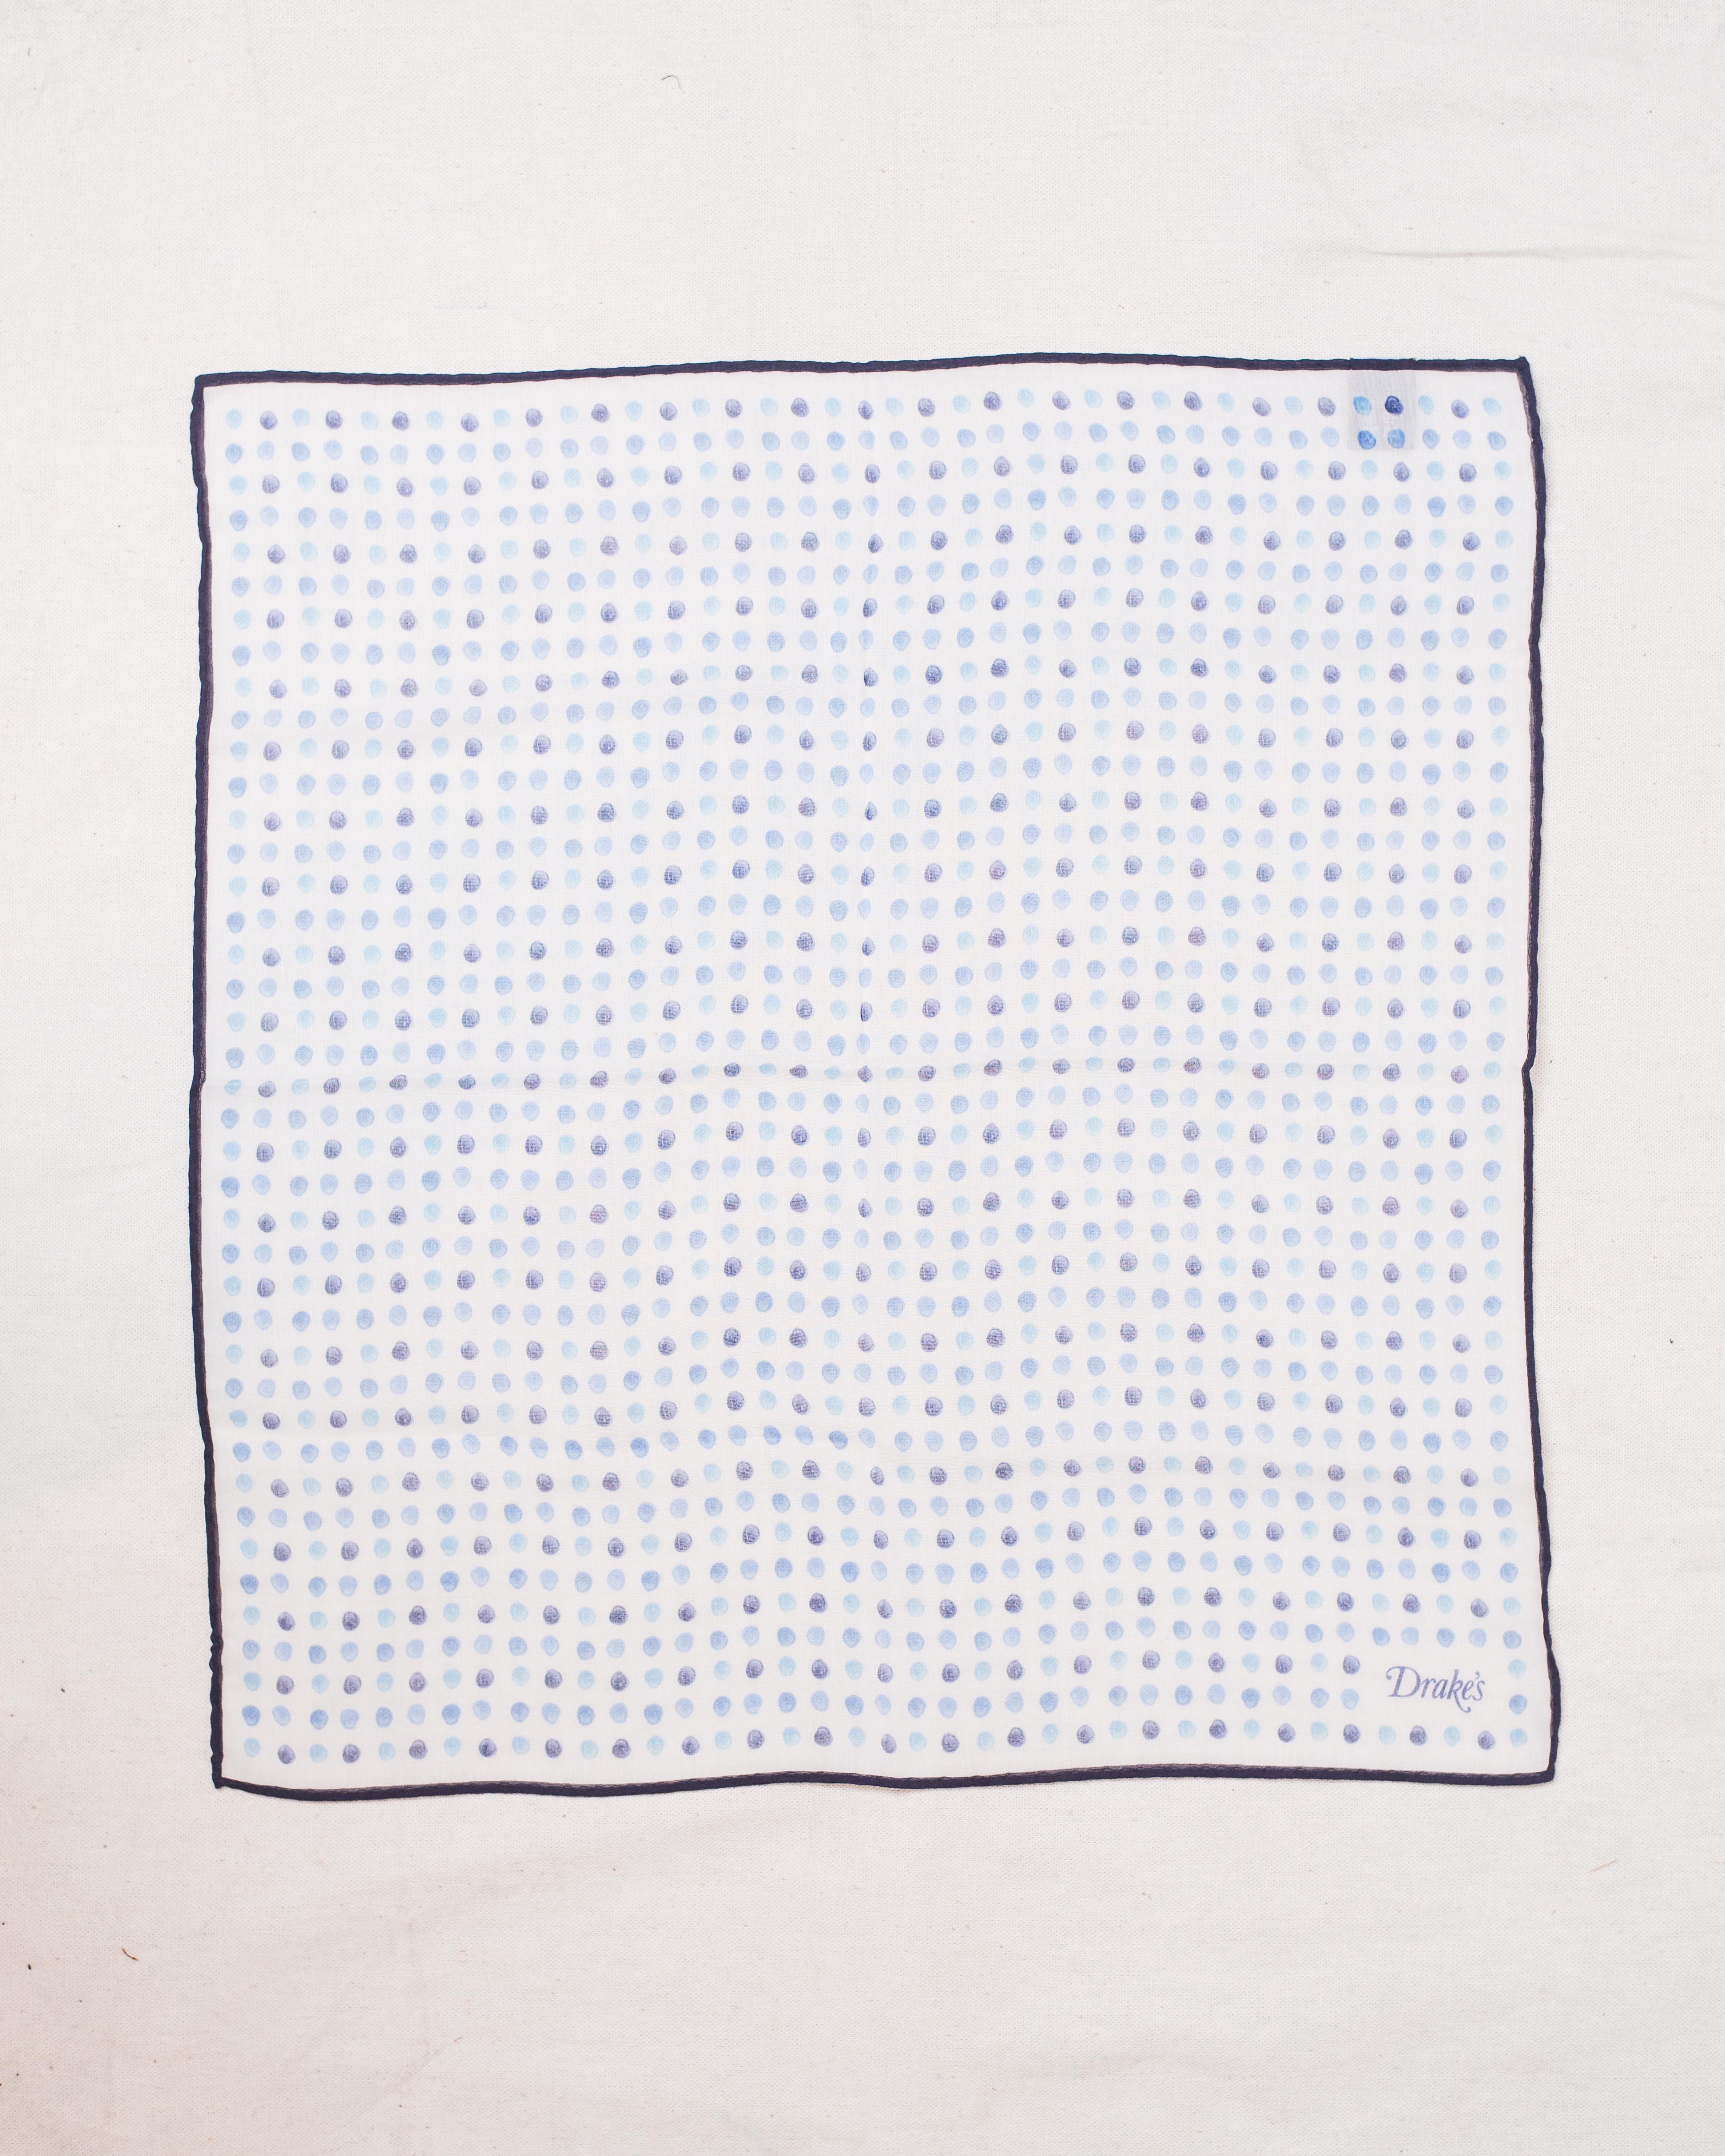 Small Polka Dots (Whole), Drake's - The Signet Store